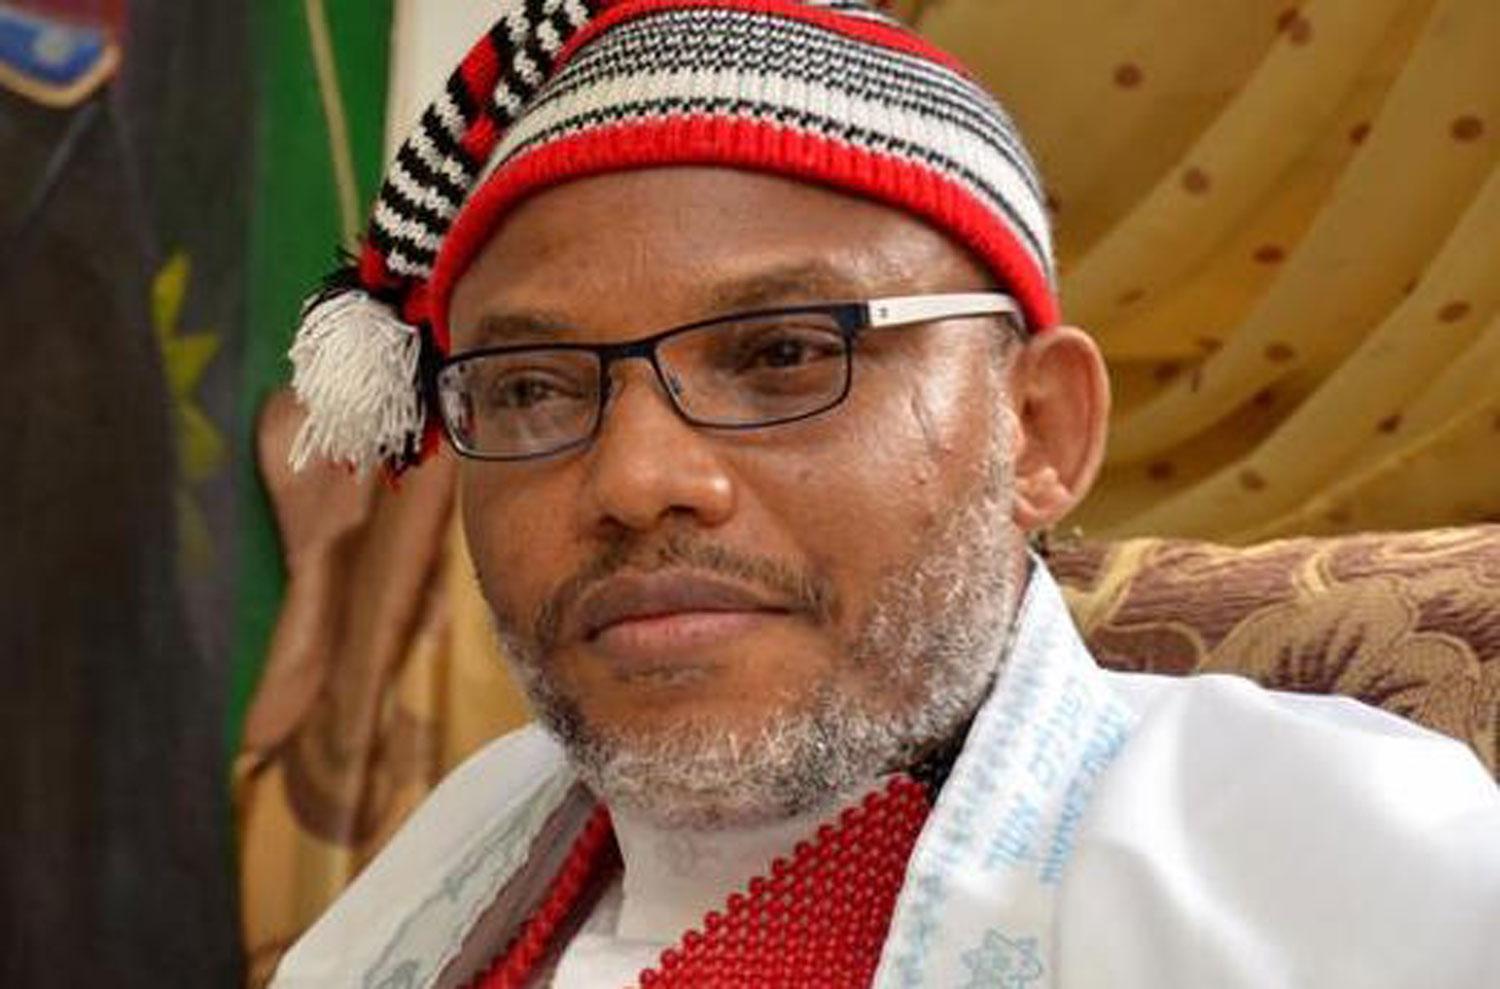 Nnamdi Kanu caused death of 60 persons in 4 months, but‘ll get fair trial— FG